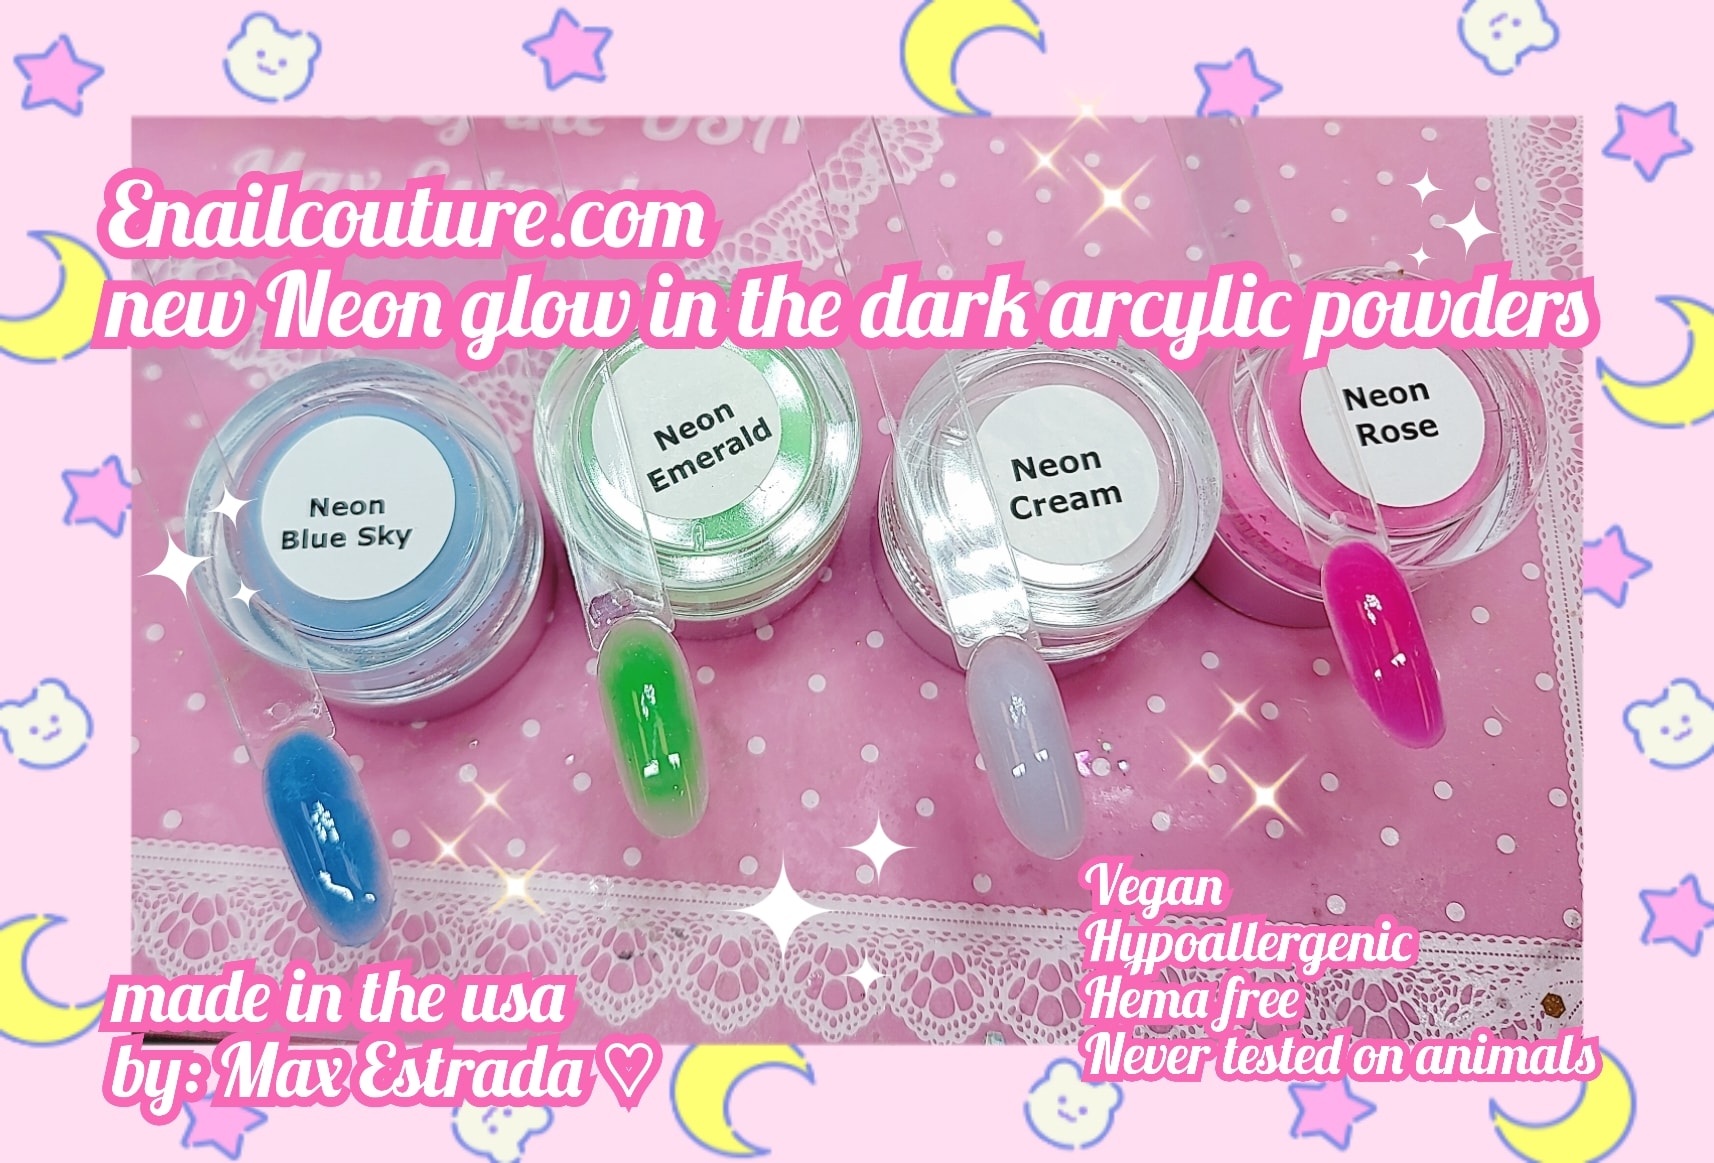 2 OUNCE GLOW IN THE DARK ACRYLIC POWDER FOR NAILS